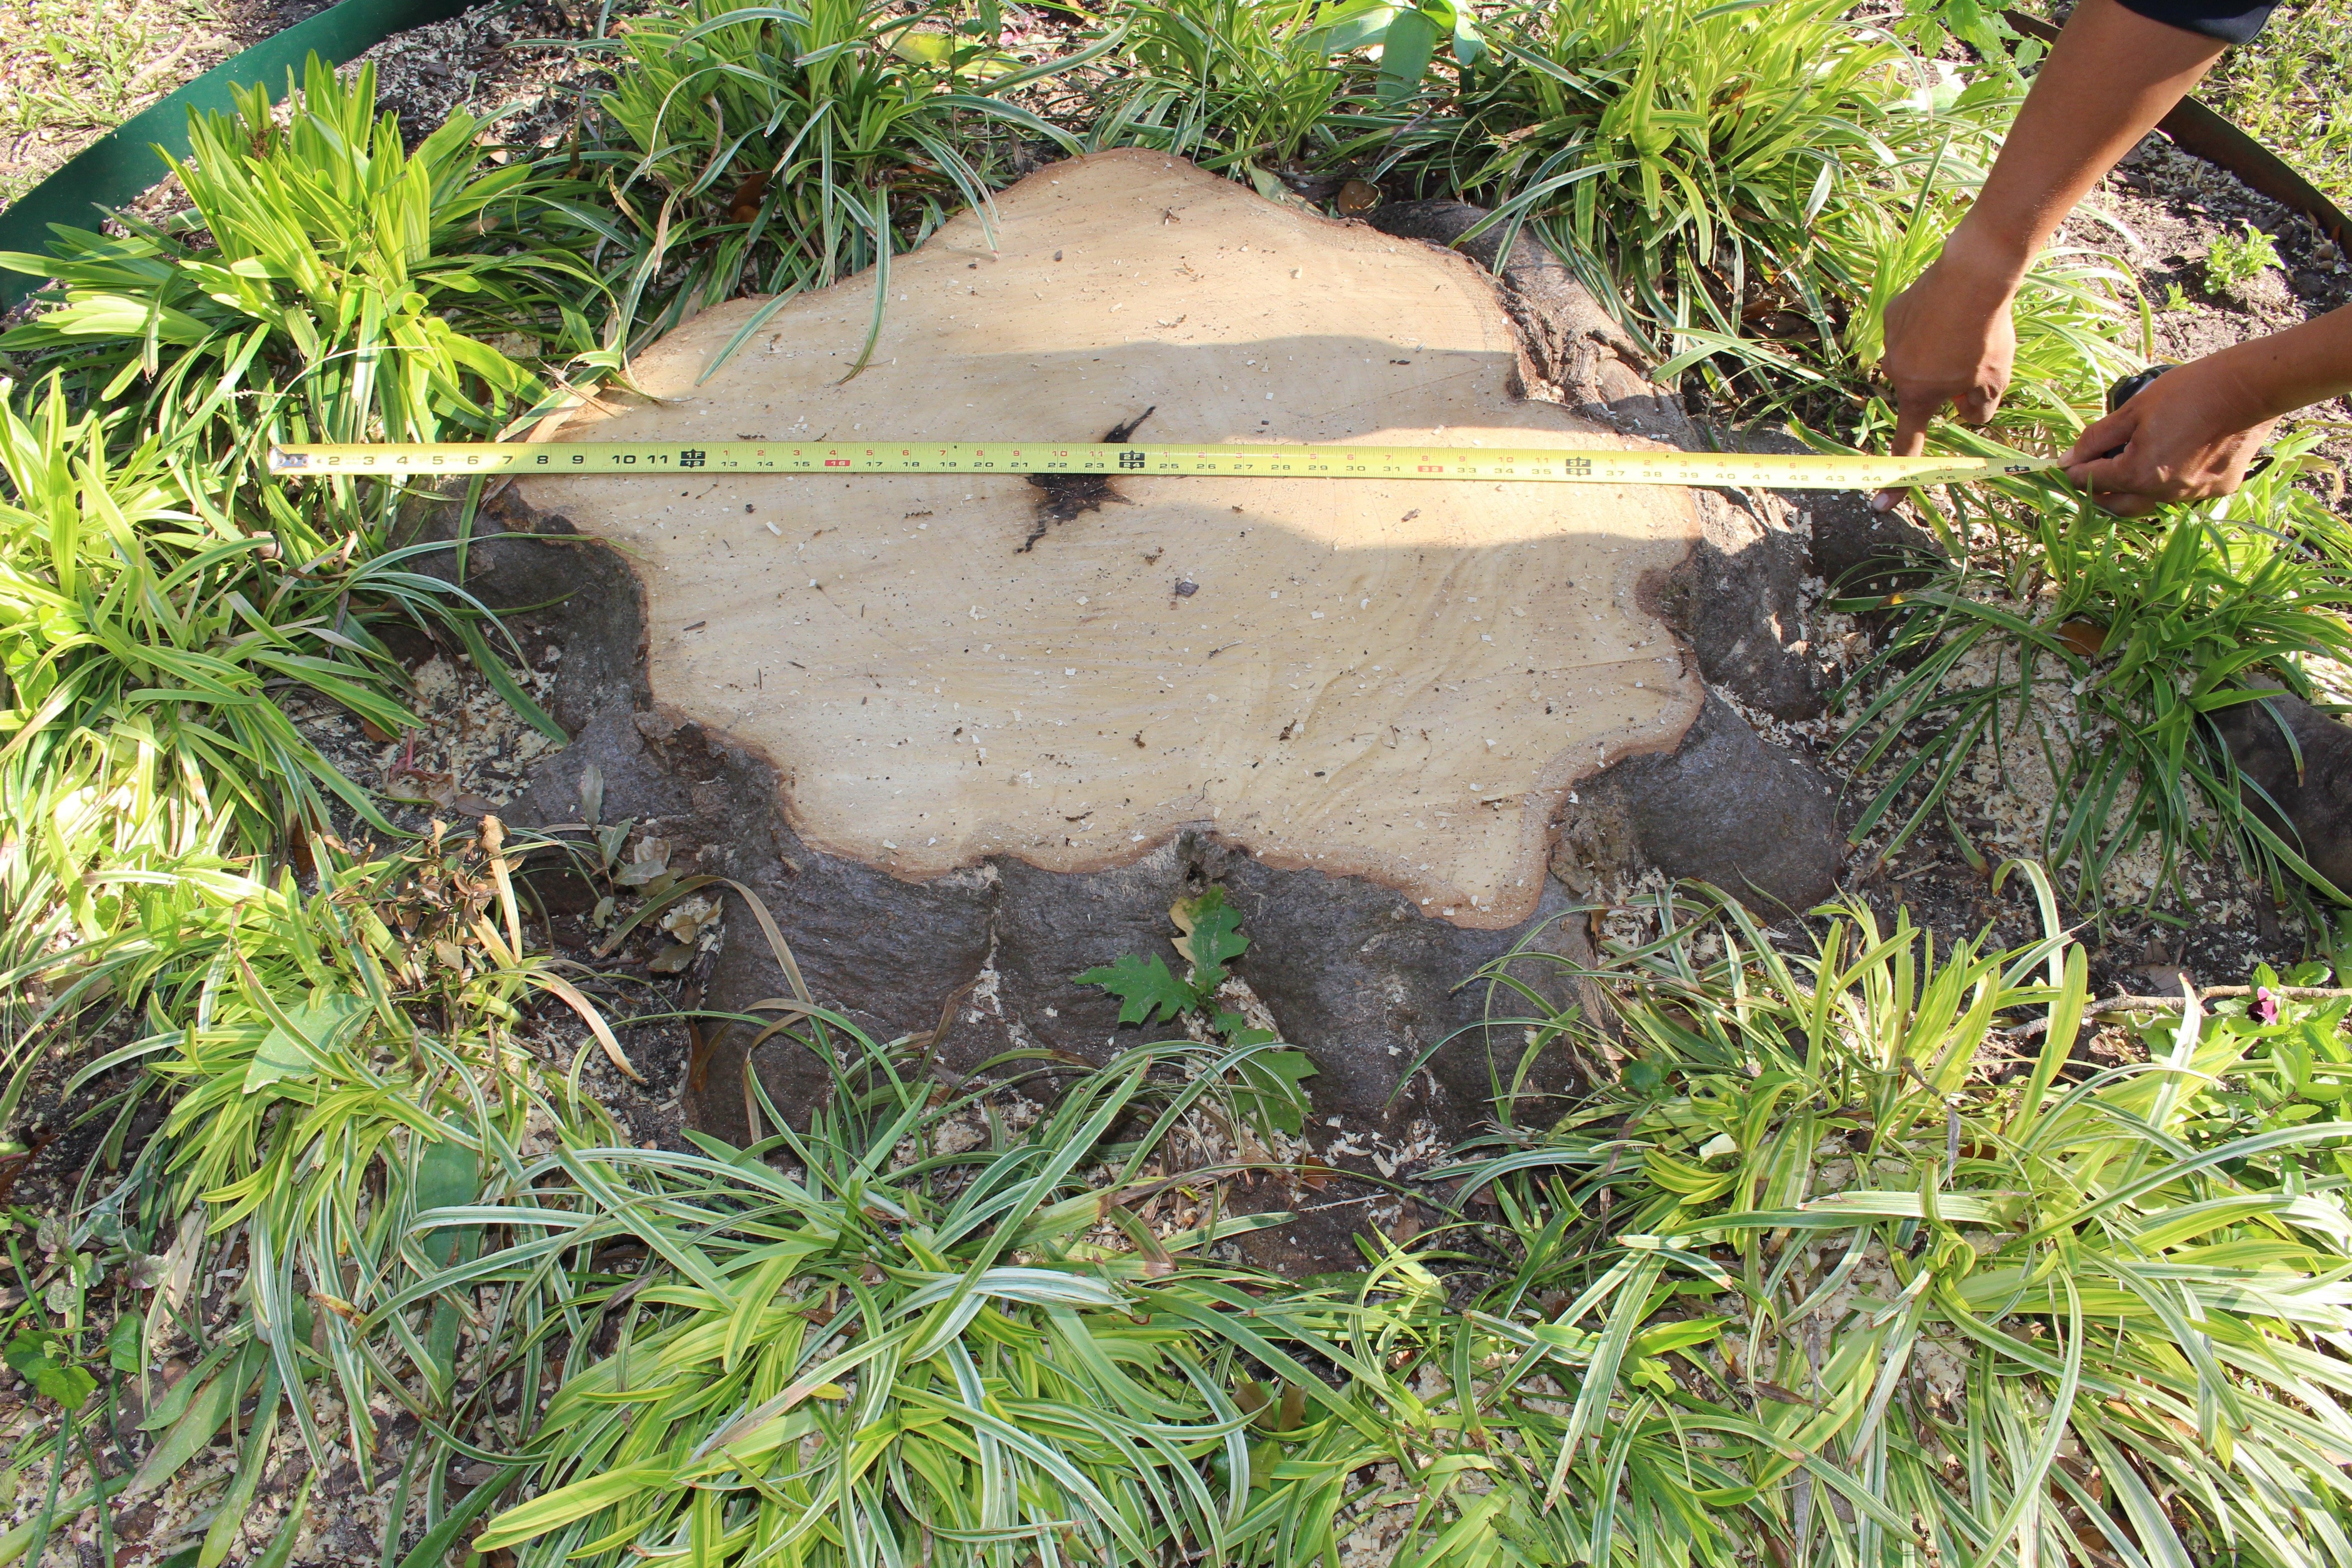 Measuring a stump in a flower bed